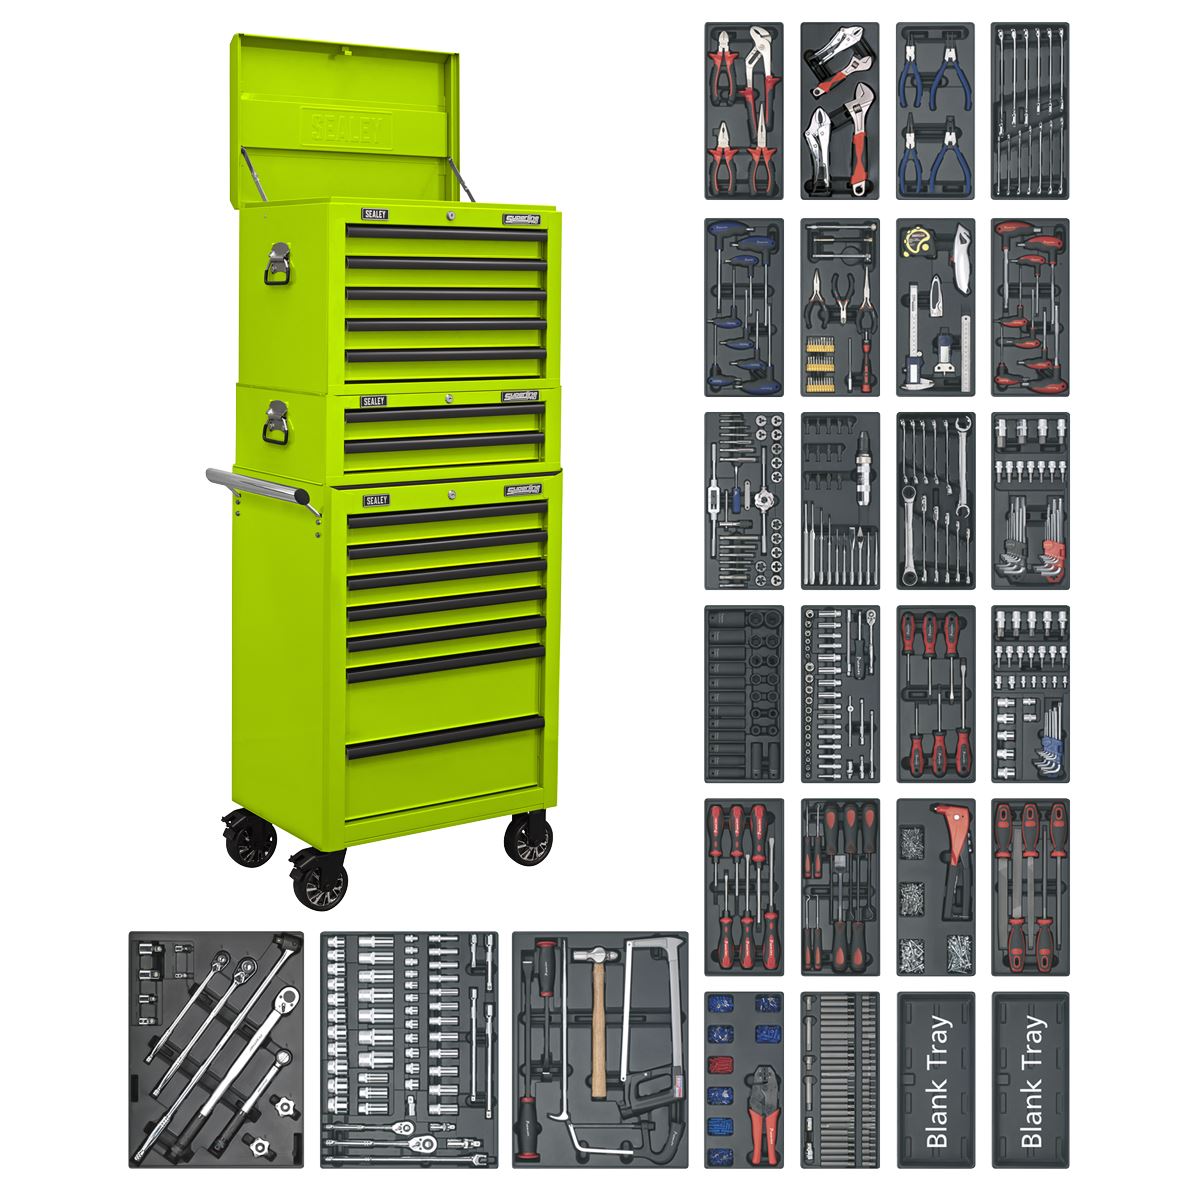 Sealey Superline Pro Tool Chest Combination 14 Drawer with Ball-Bearing Slides - Green & 1179pc Tool Kit